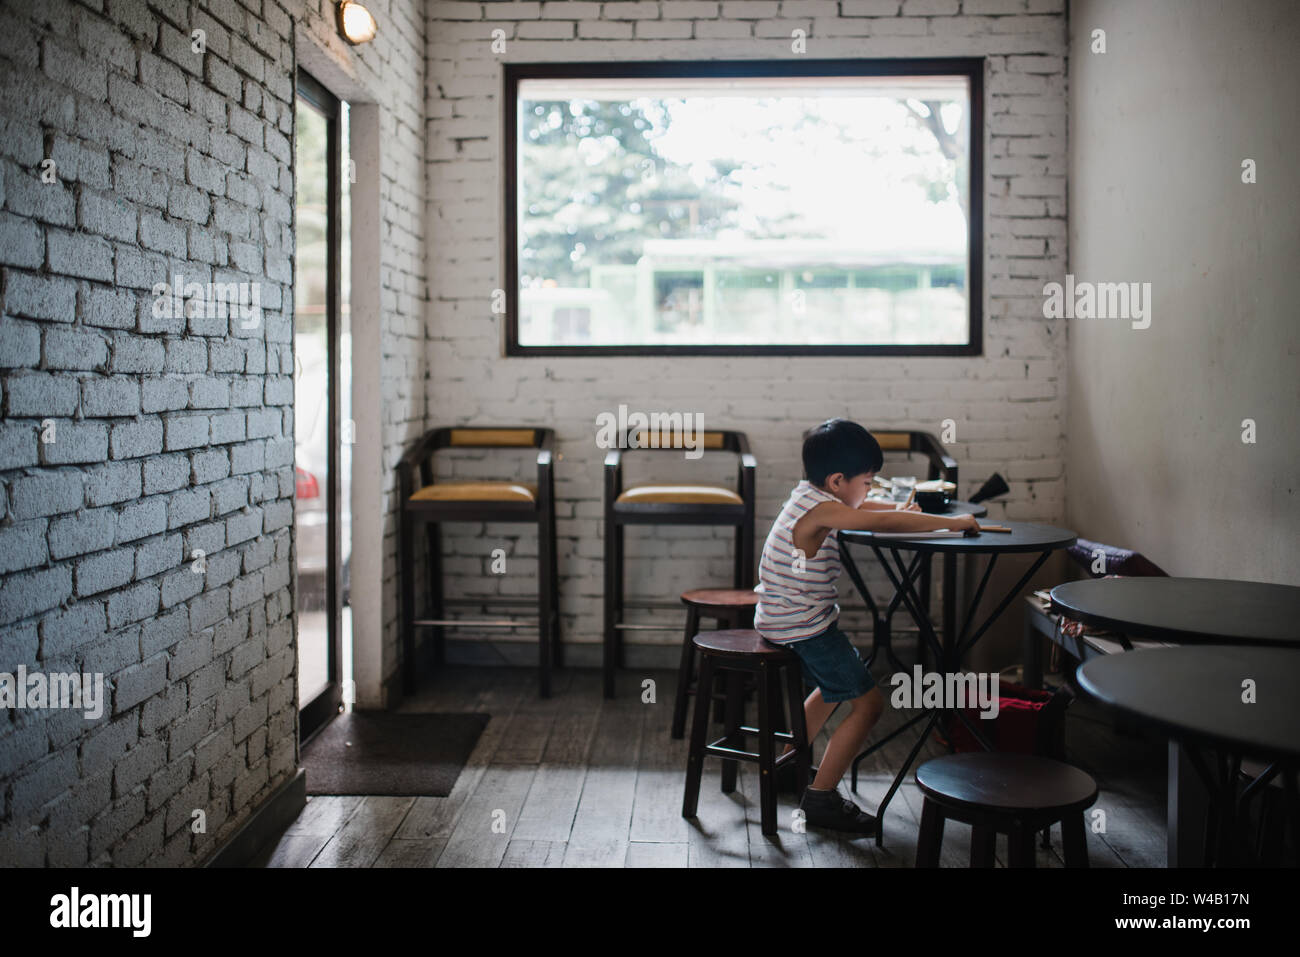 Boy sitting in a cafe Stock Photo